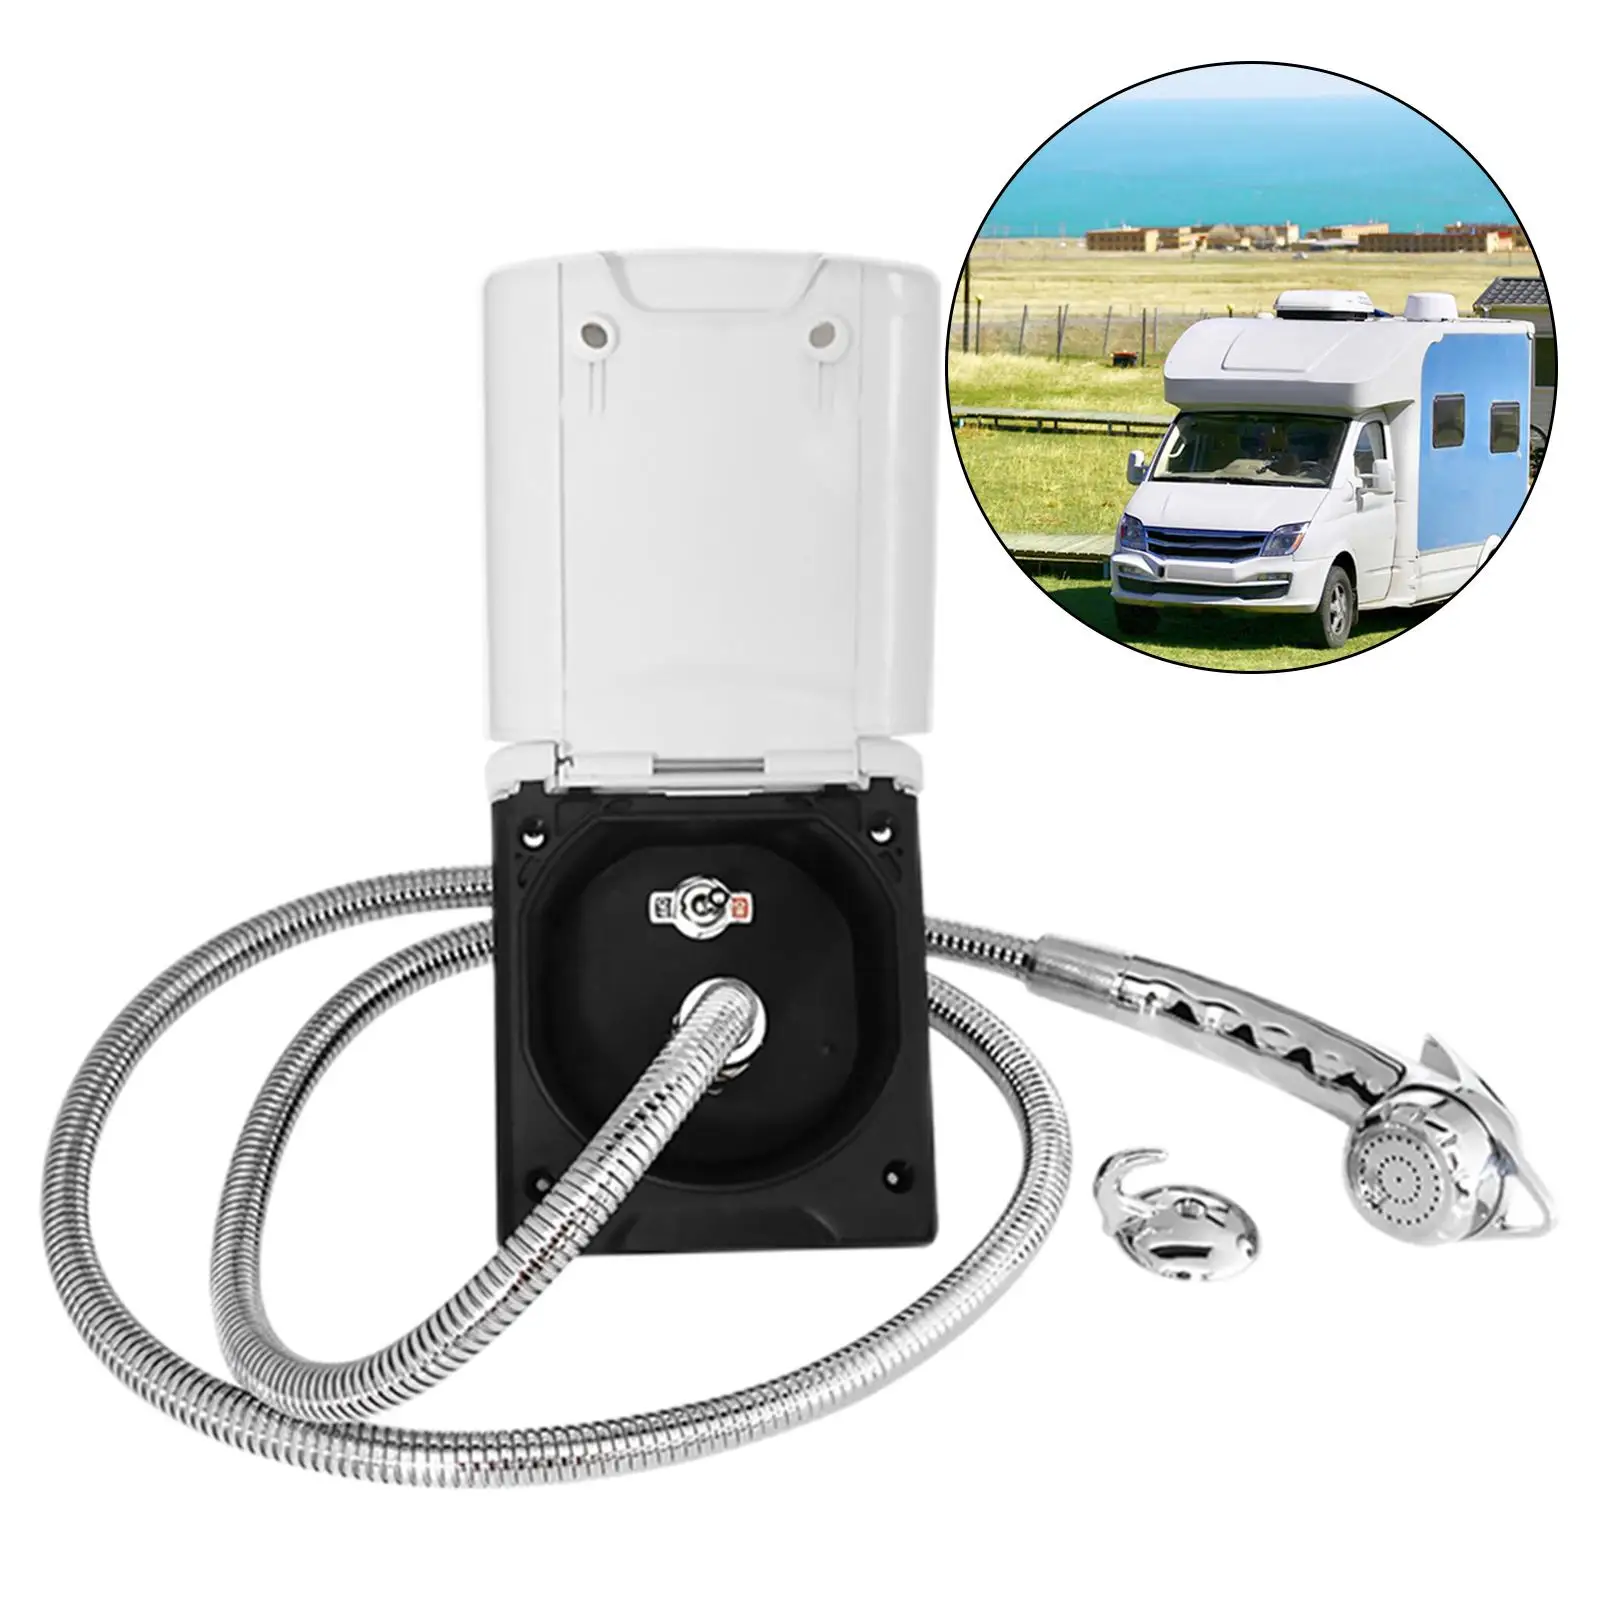 RV Exterior Shower Box Kit with Faucet Hose Weatherproof Outdoor Shower Box for Boat Shower Accessories Exterior Faucet